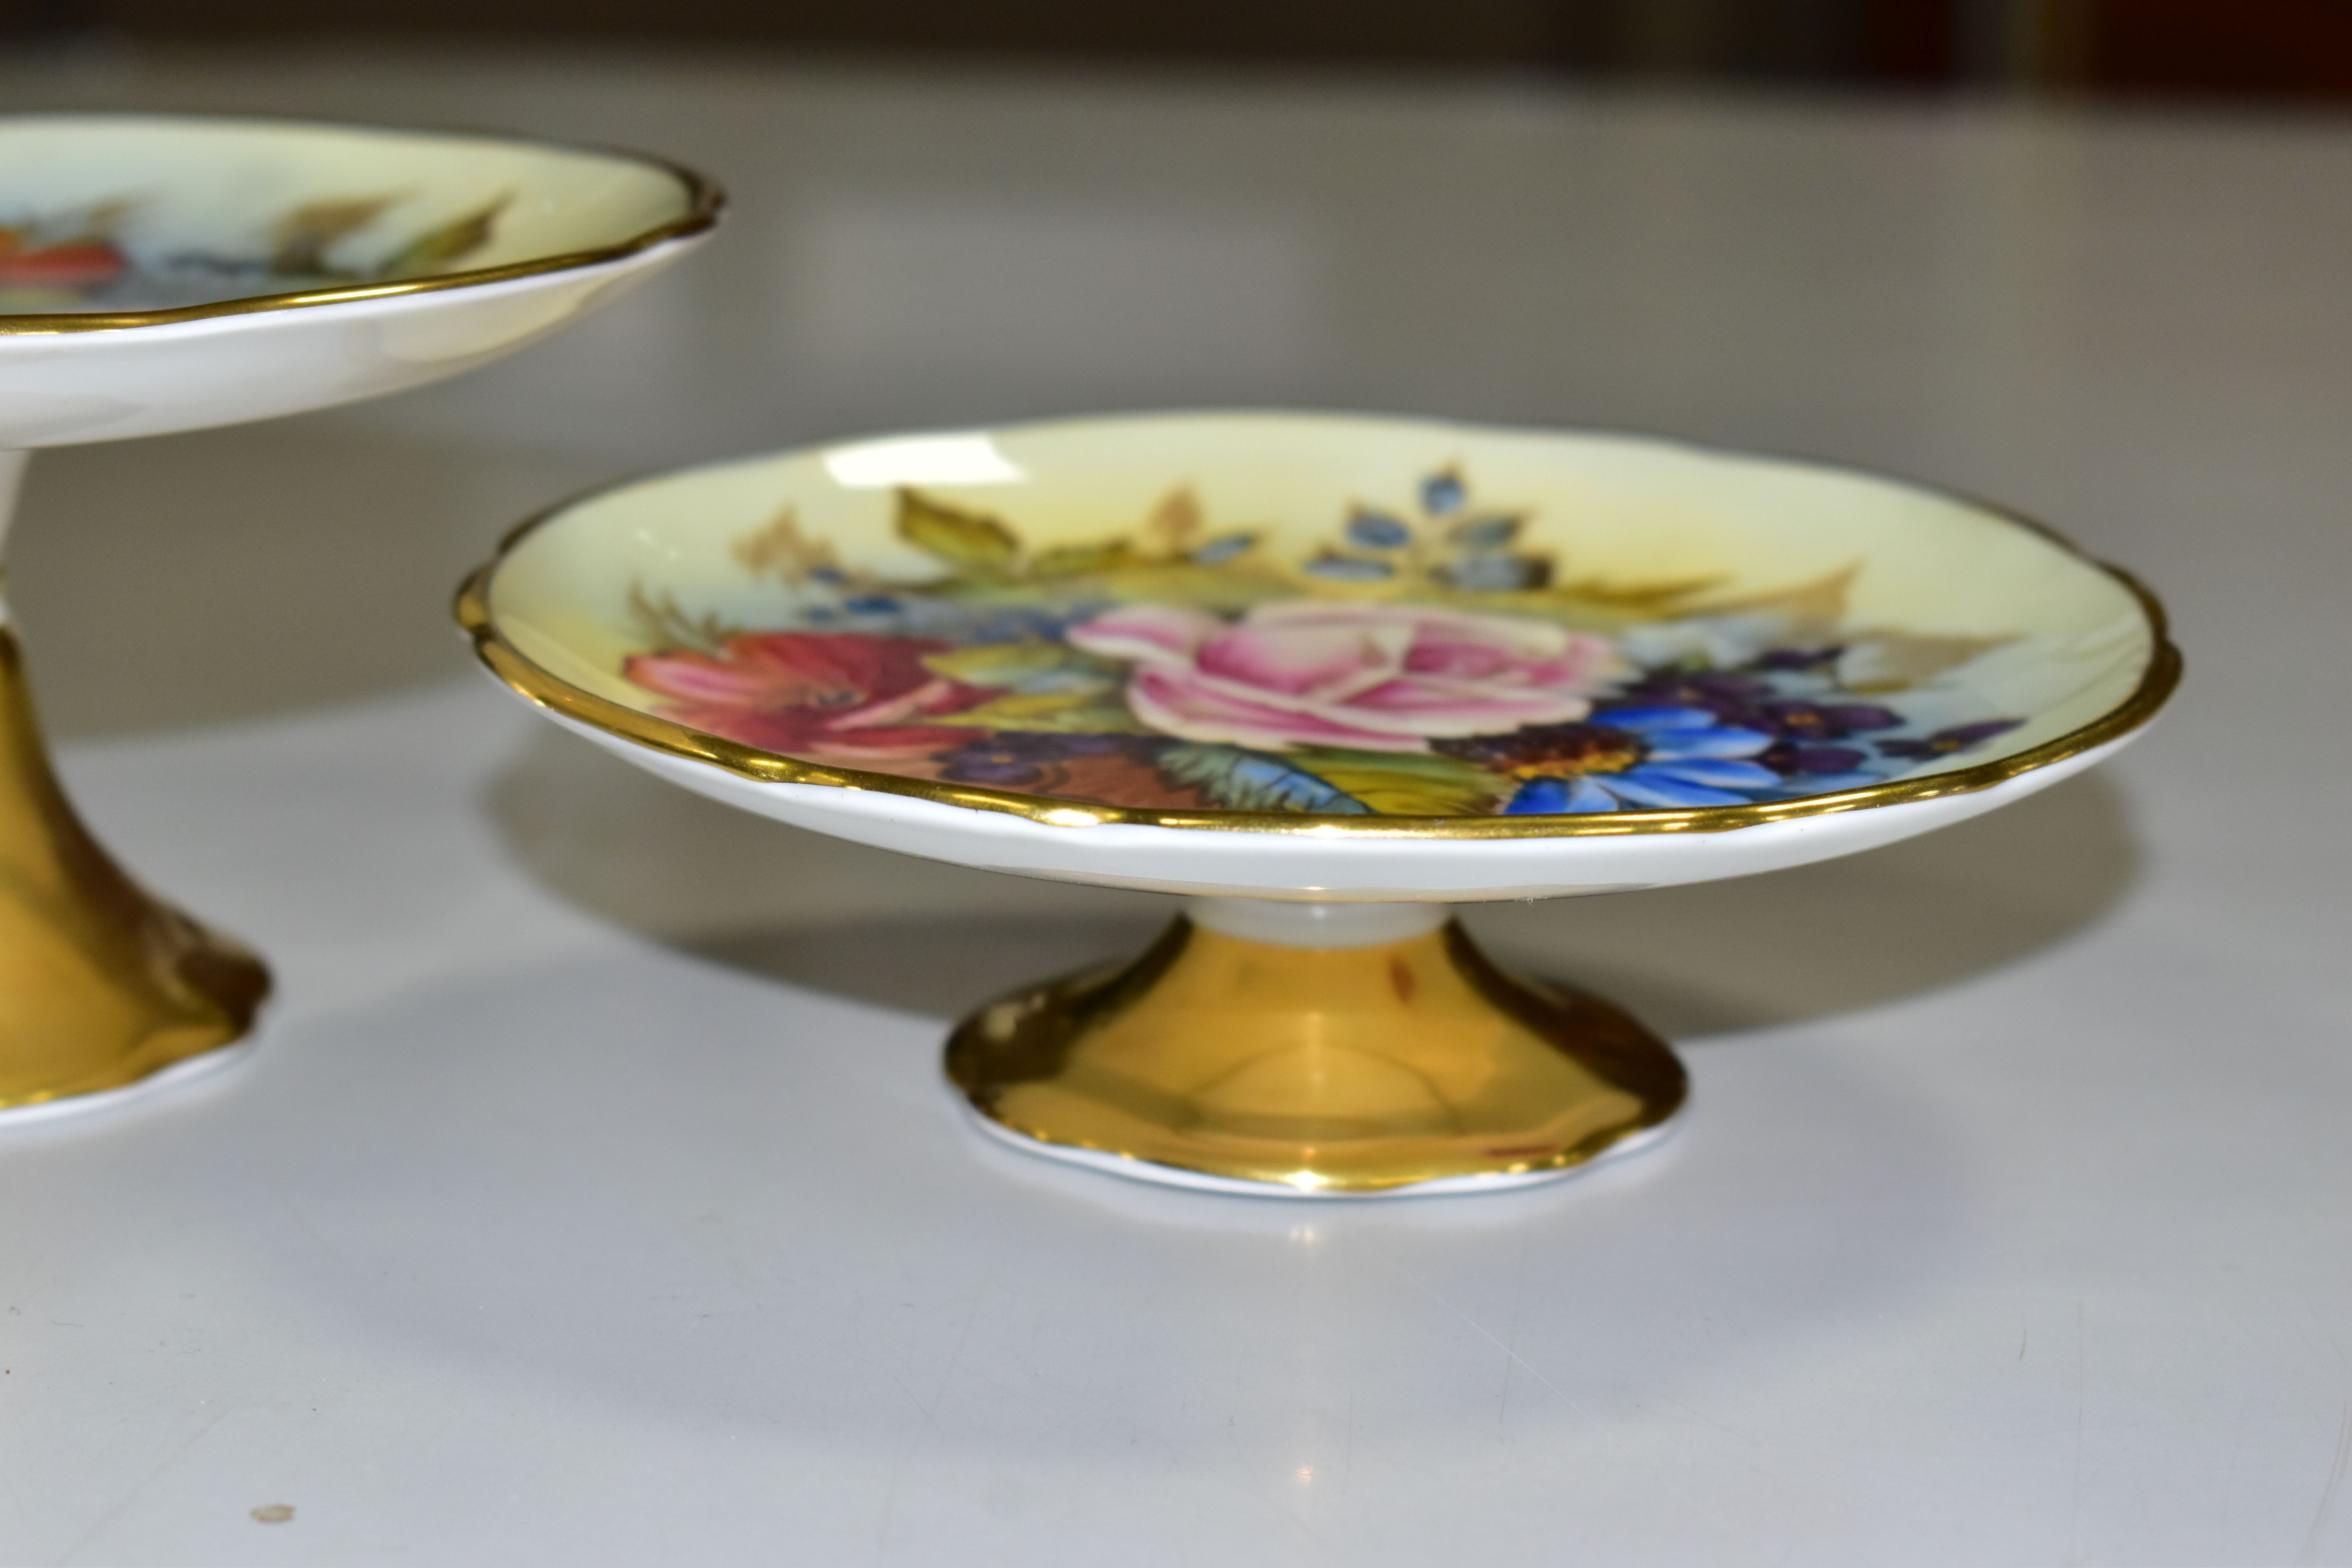 TWO AYNSLEY FLORAL DECORATED PEDESTAL DISHES BY J. A. BAILEY, with wavy rims and gilt bases, both - Image 6 of 6